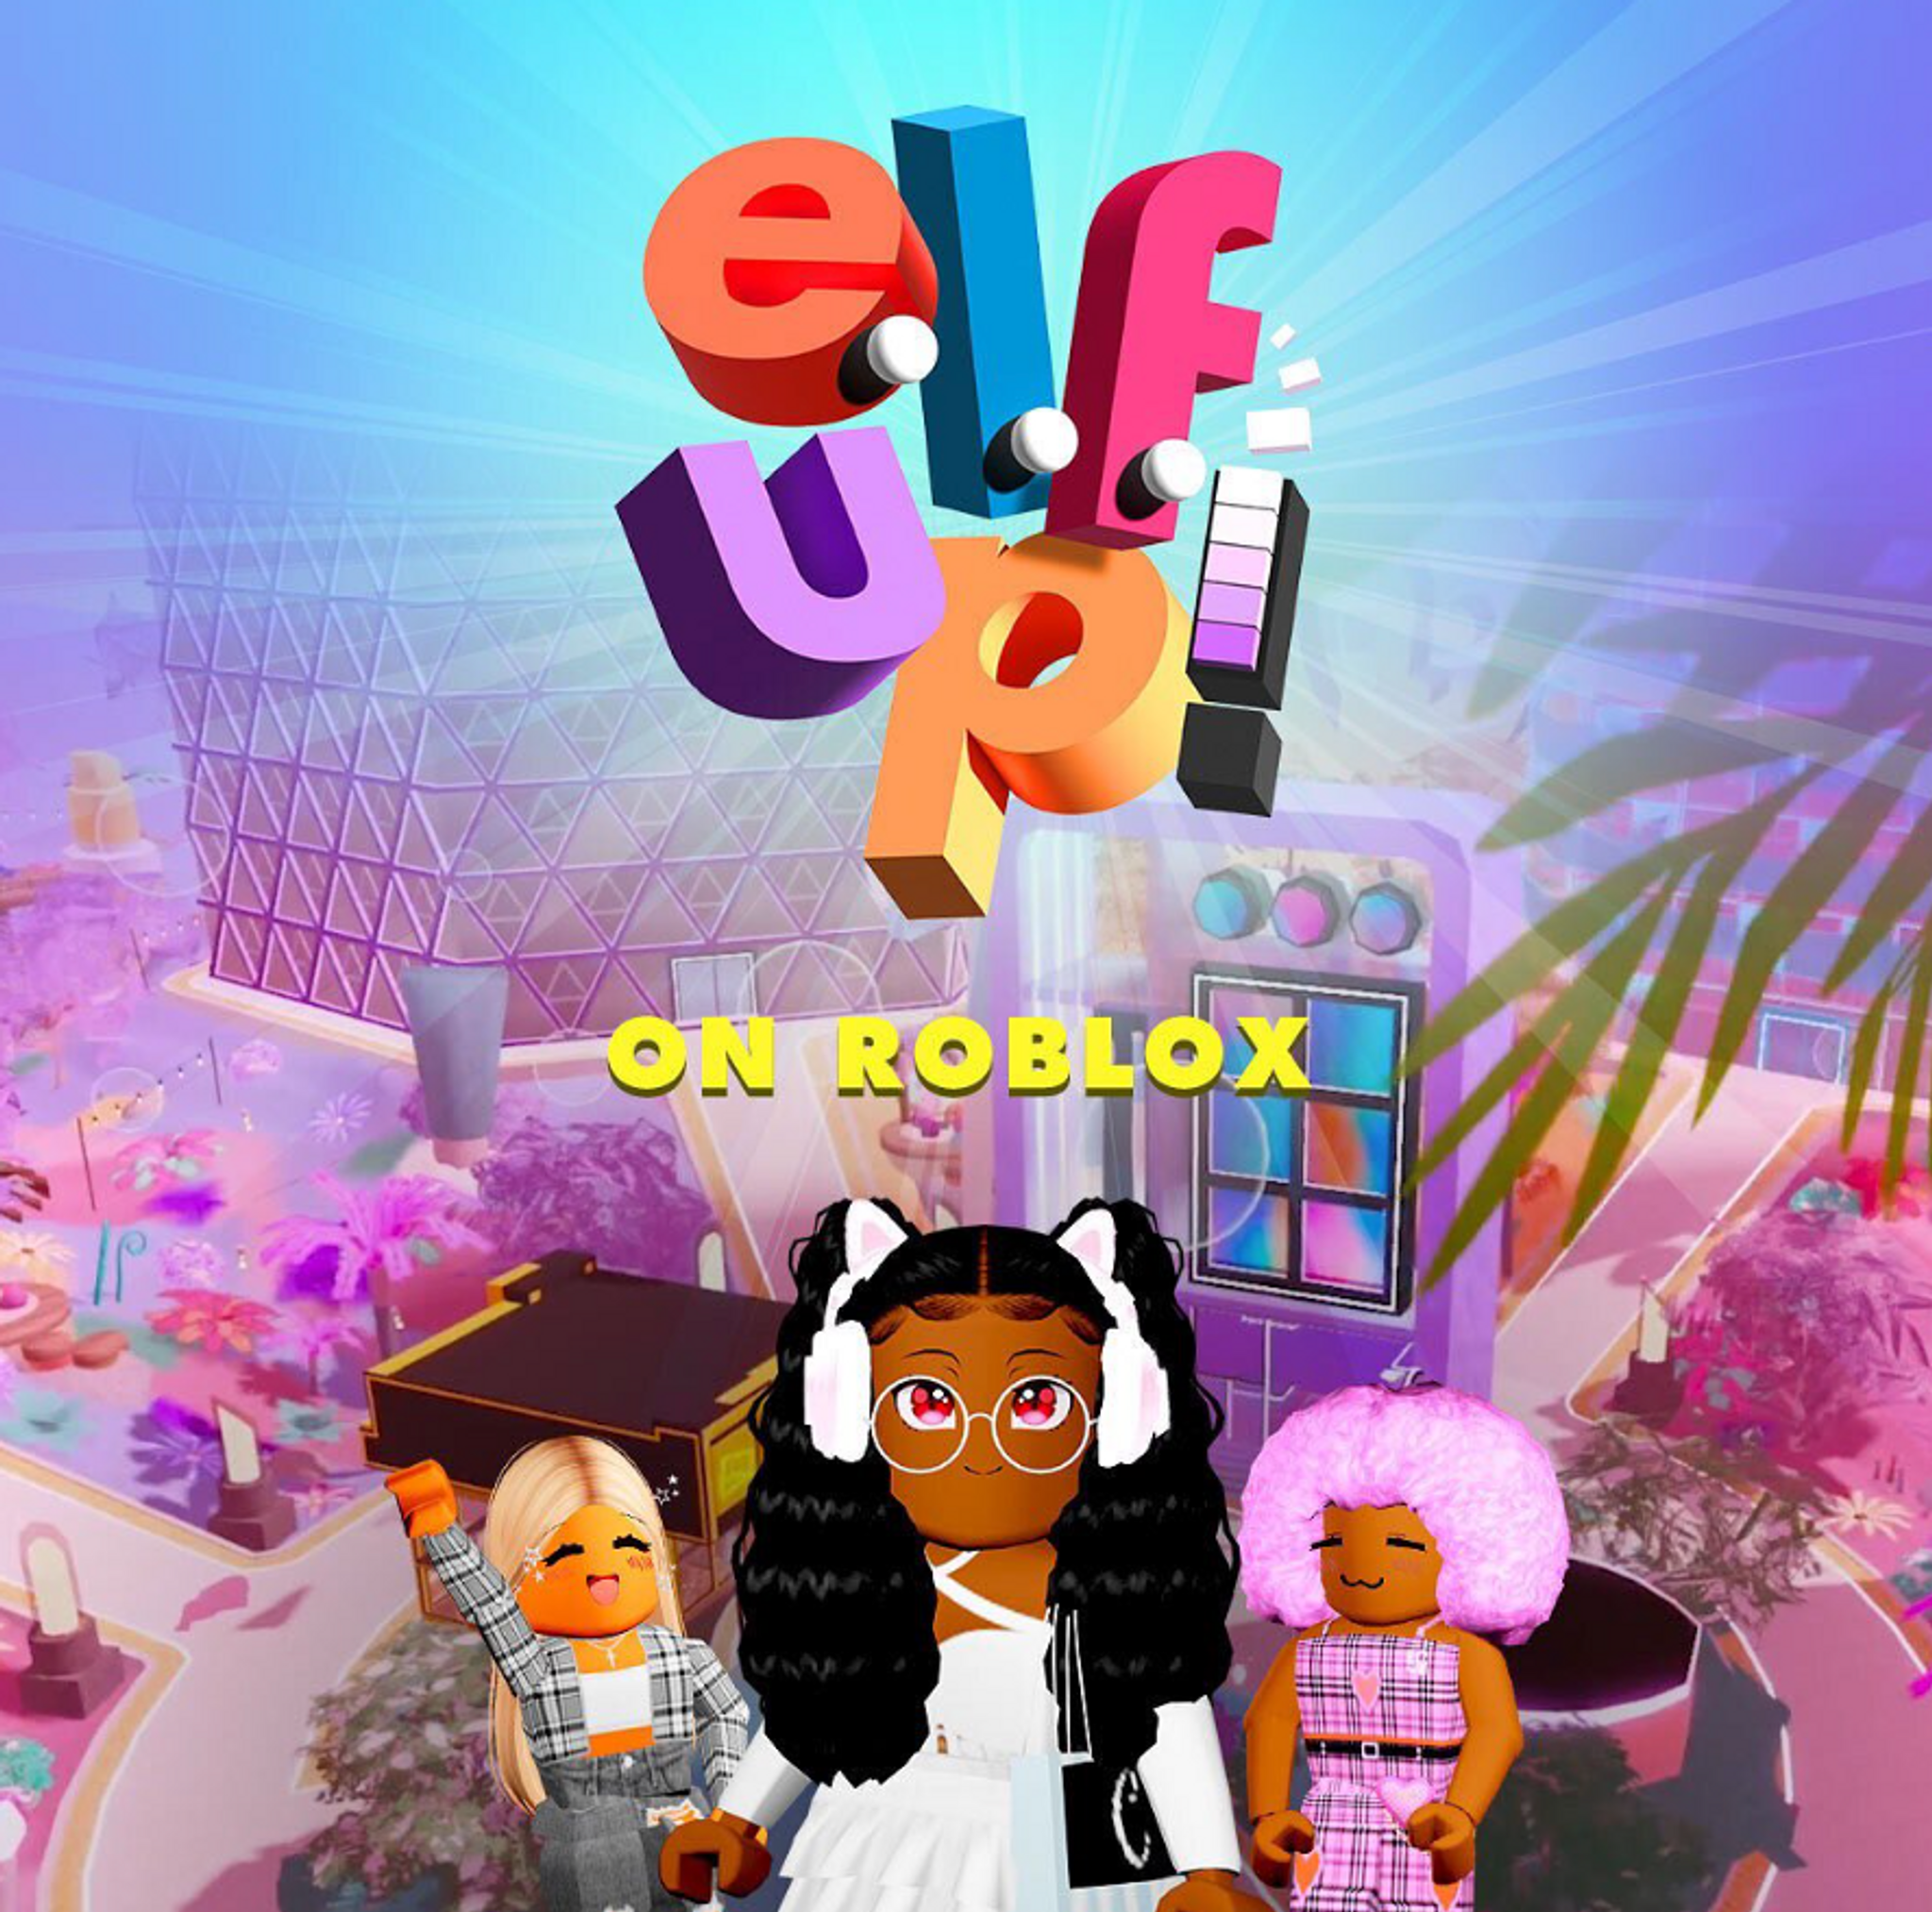 e.l.f. encourages youth entrepreneurship with Roblox